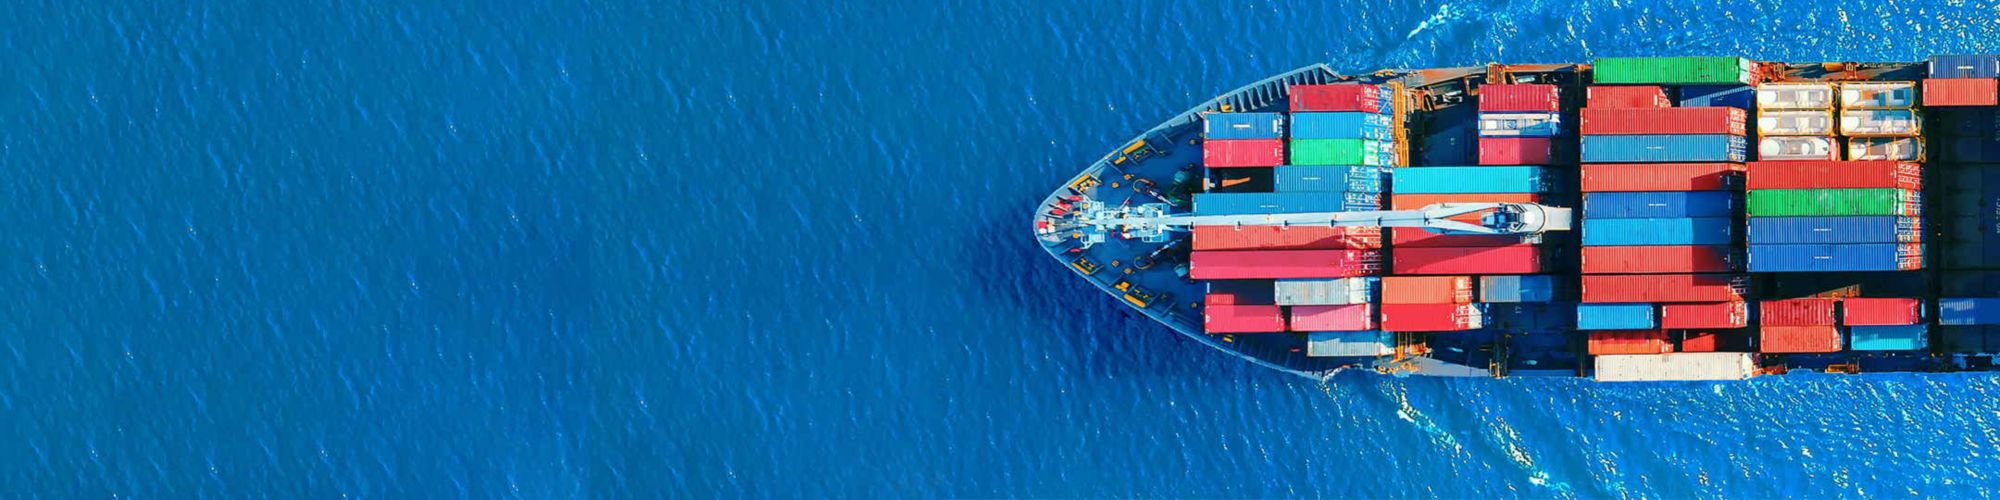 Boat carrying containers seen from above